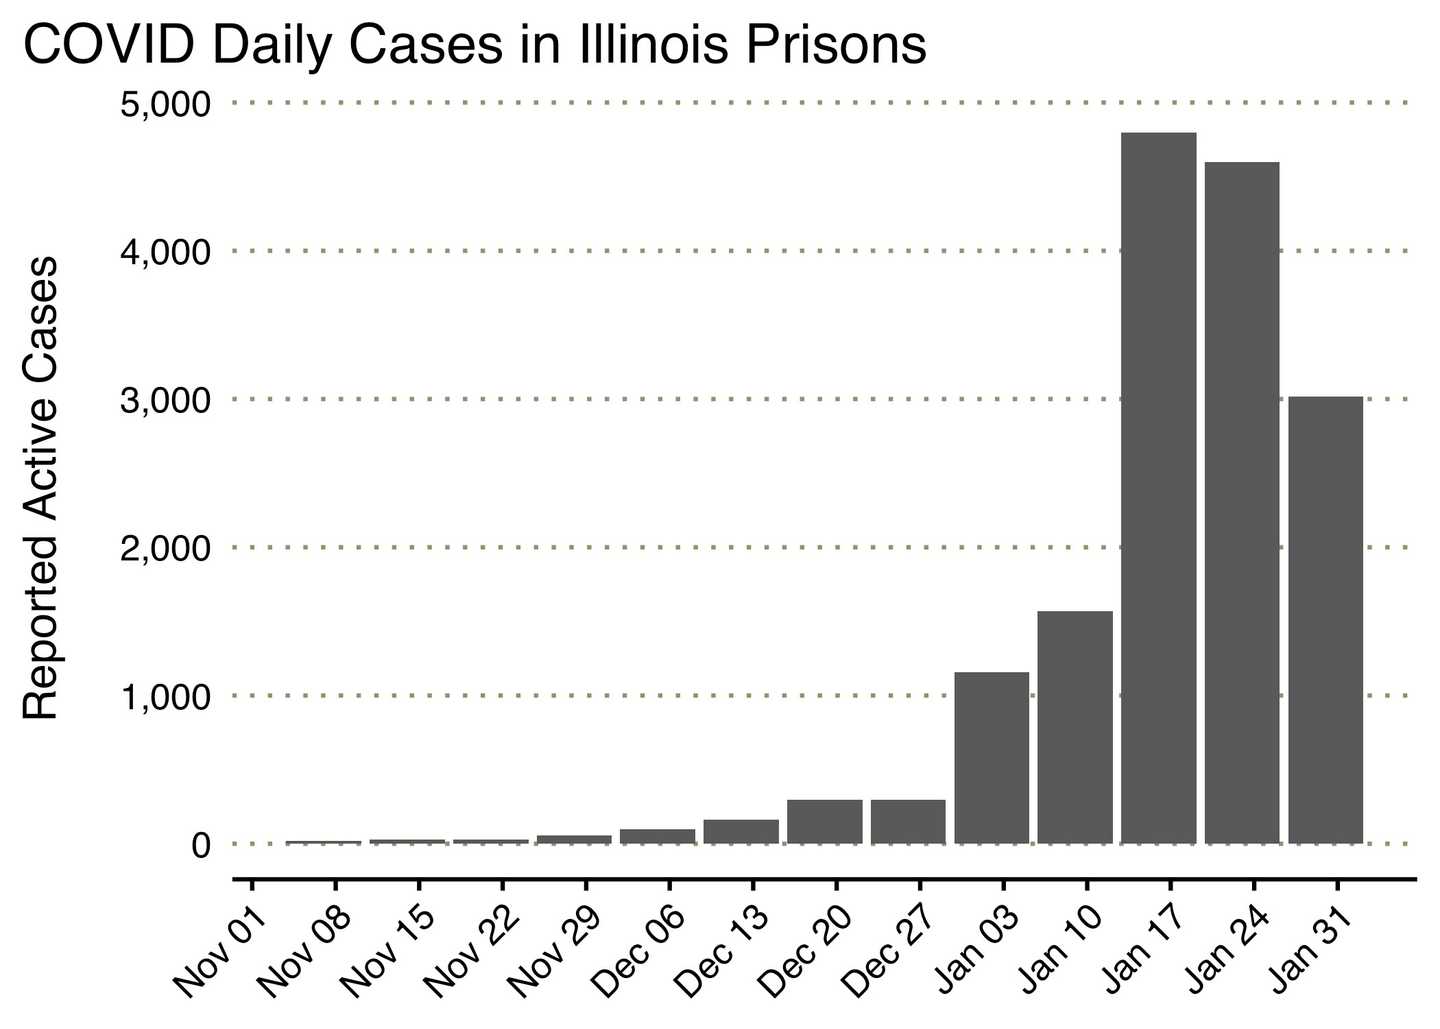 Graph showing high daily COVID case counts in Illinois prisons.